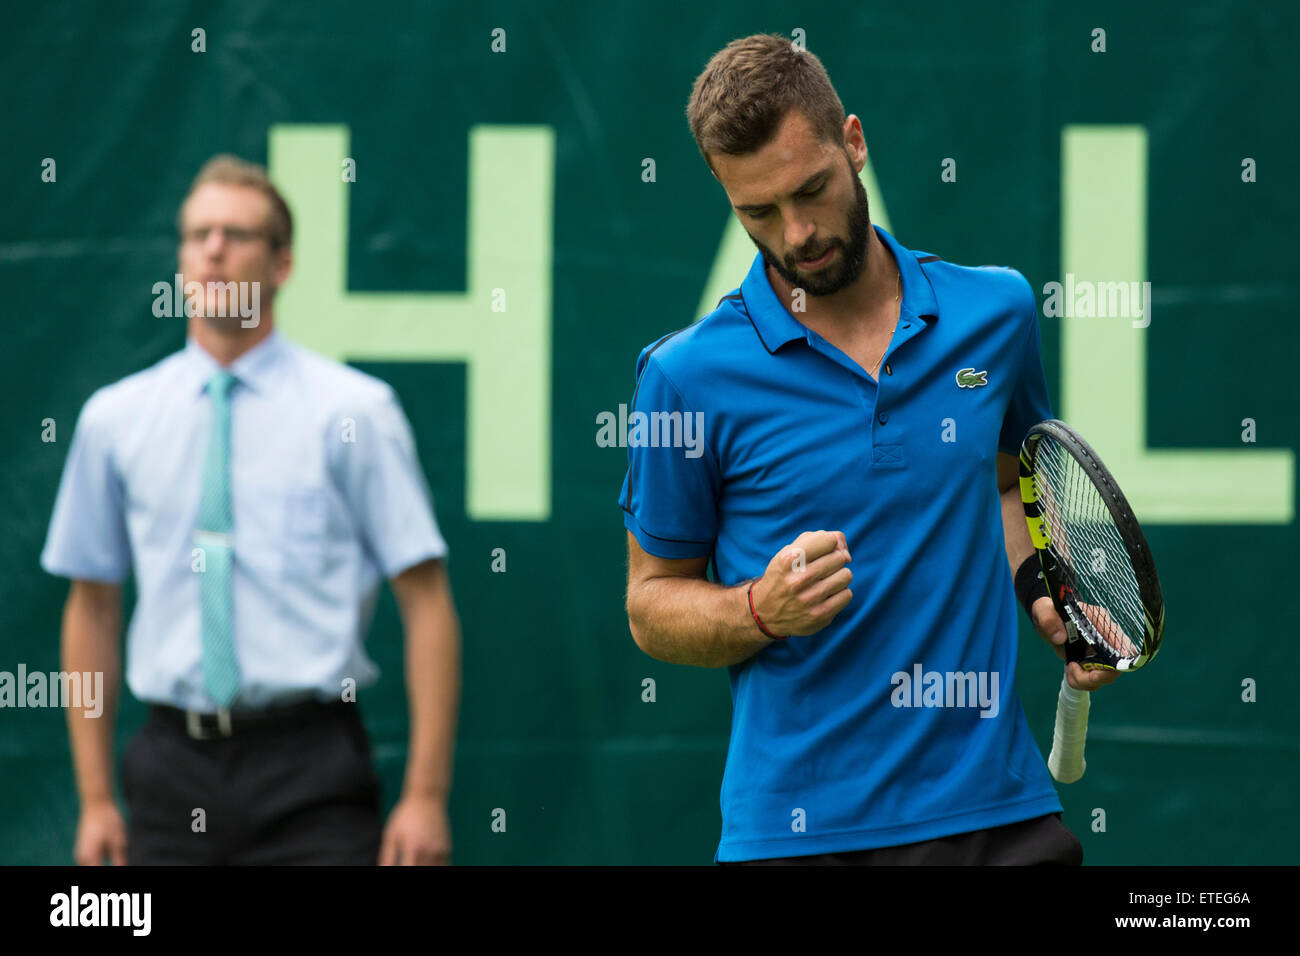 Halle, Germany. 13th June, 2015. Benoit Paire (FR) celebrates winning the first set in the qualifying rounds of the ATP Gerry Weber Open Tennis Championships at Halle, Germany. Credit:  Gruffydd Thomas/Alamy Live News Stock Photo